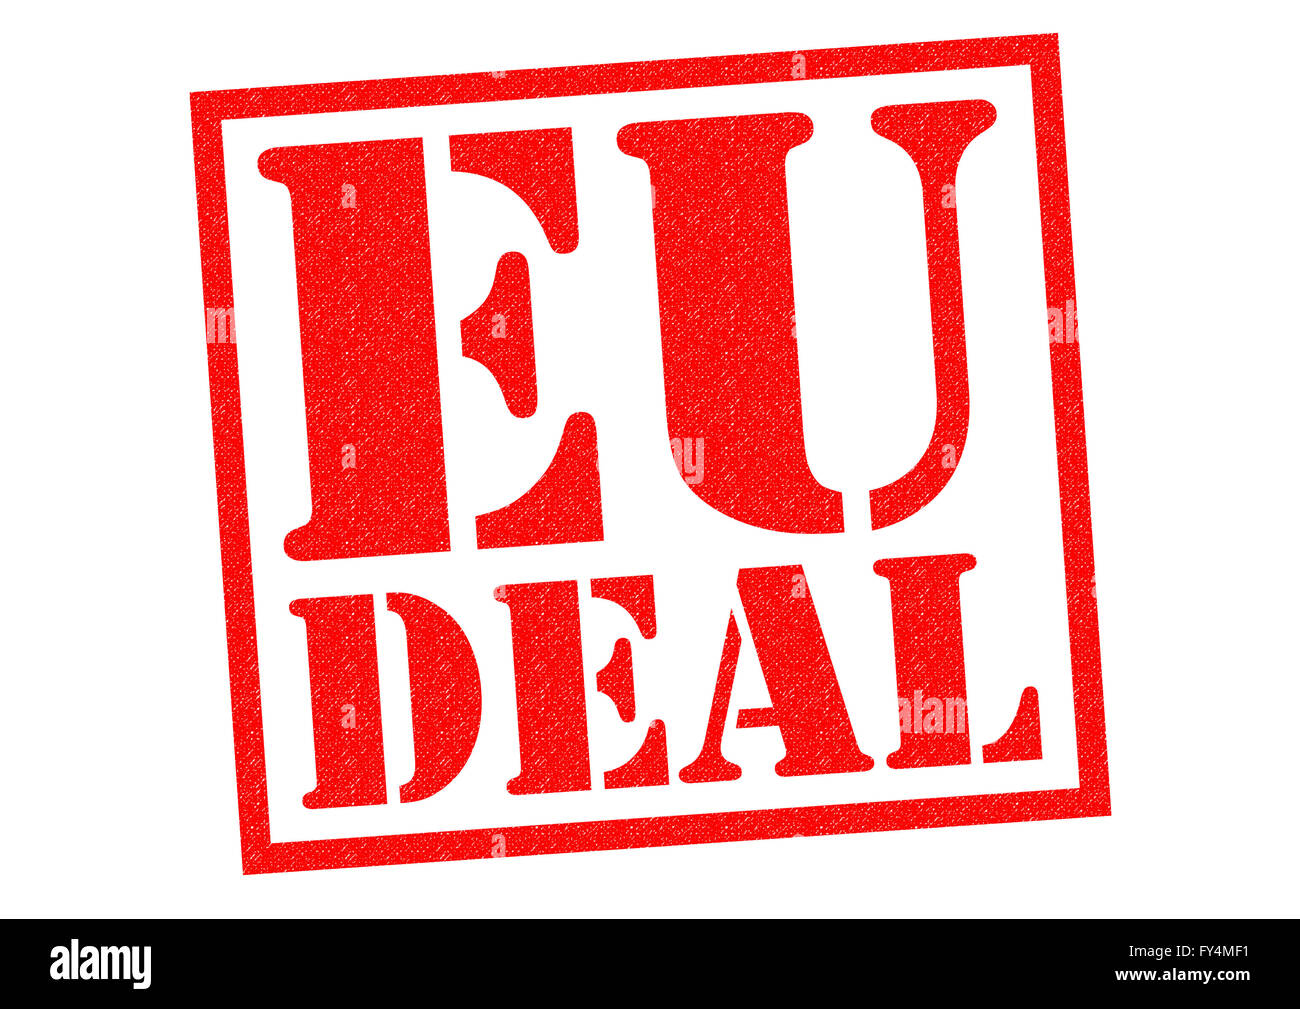 EU DEAL red Rubber Stamp over a white background. Stock Photo